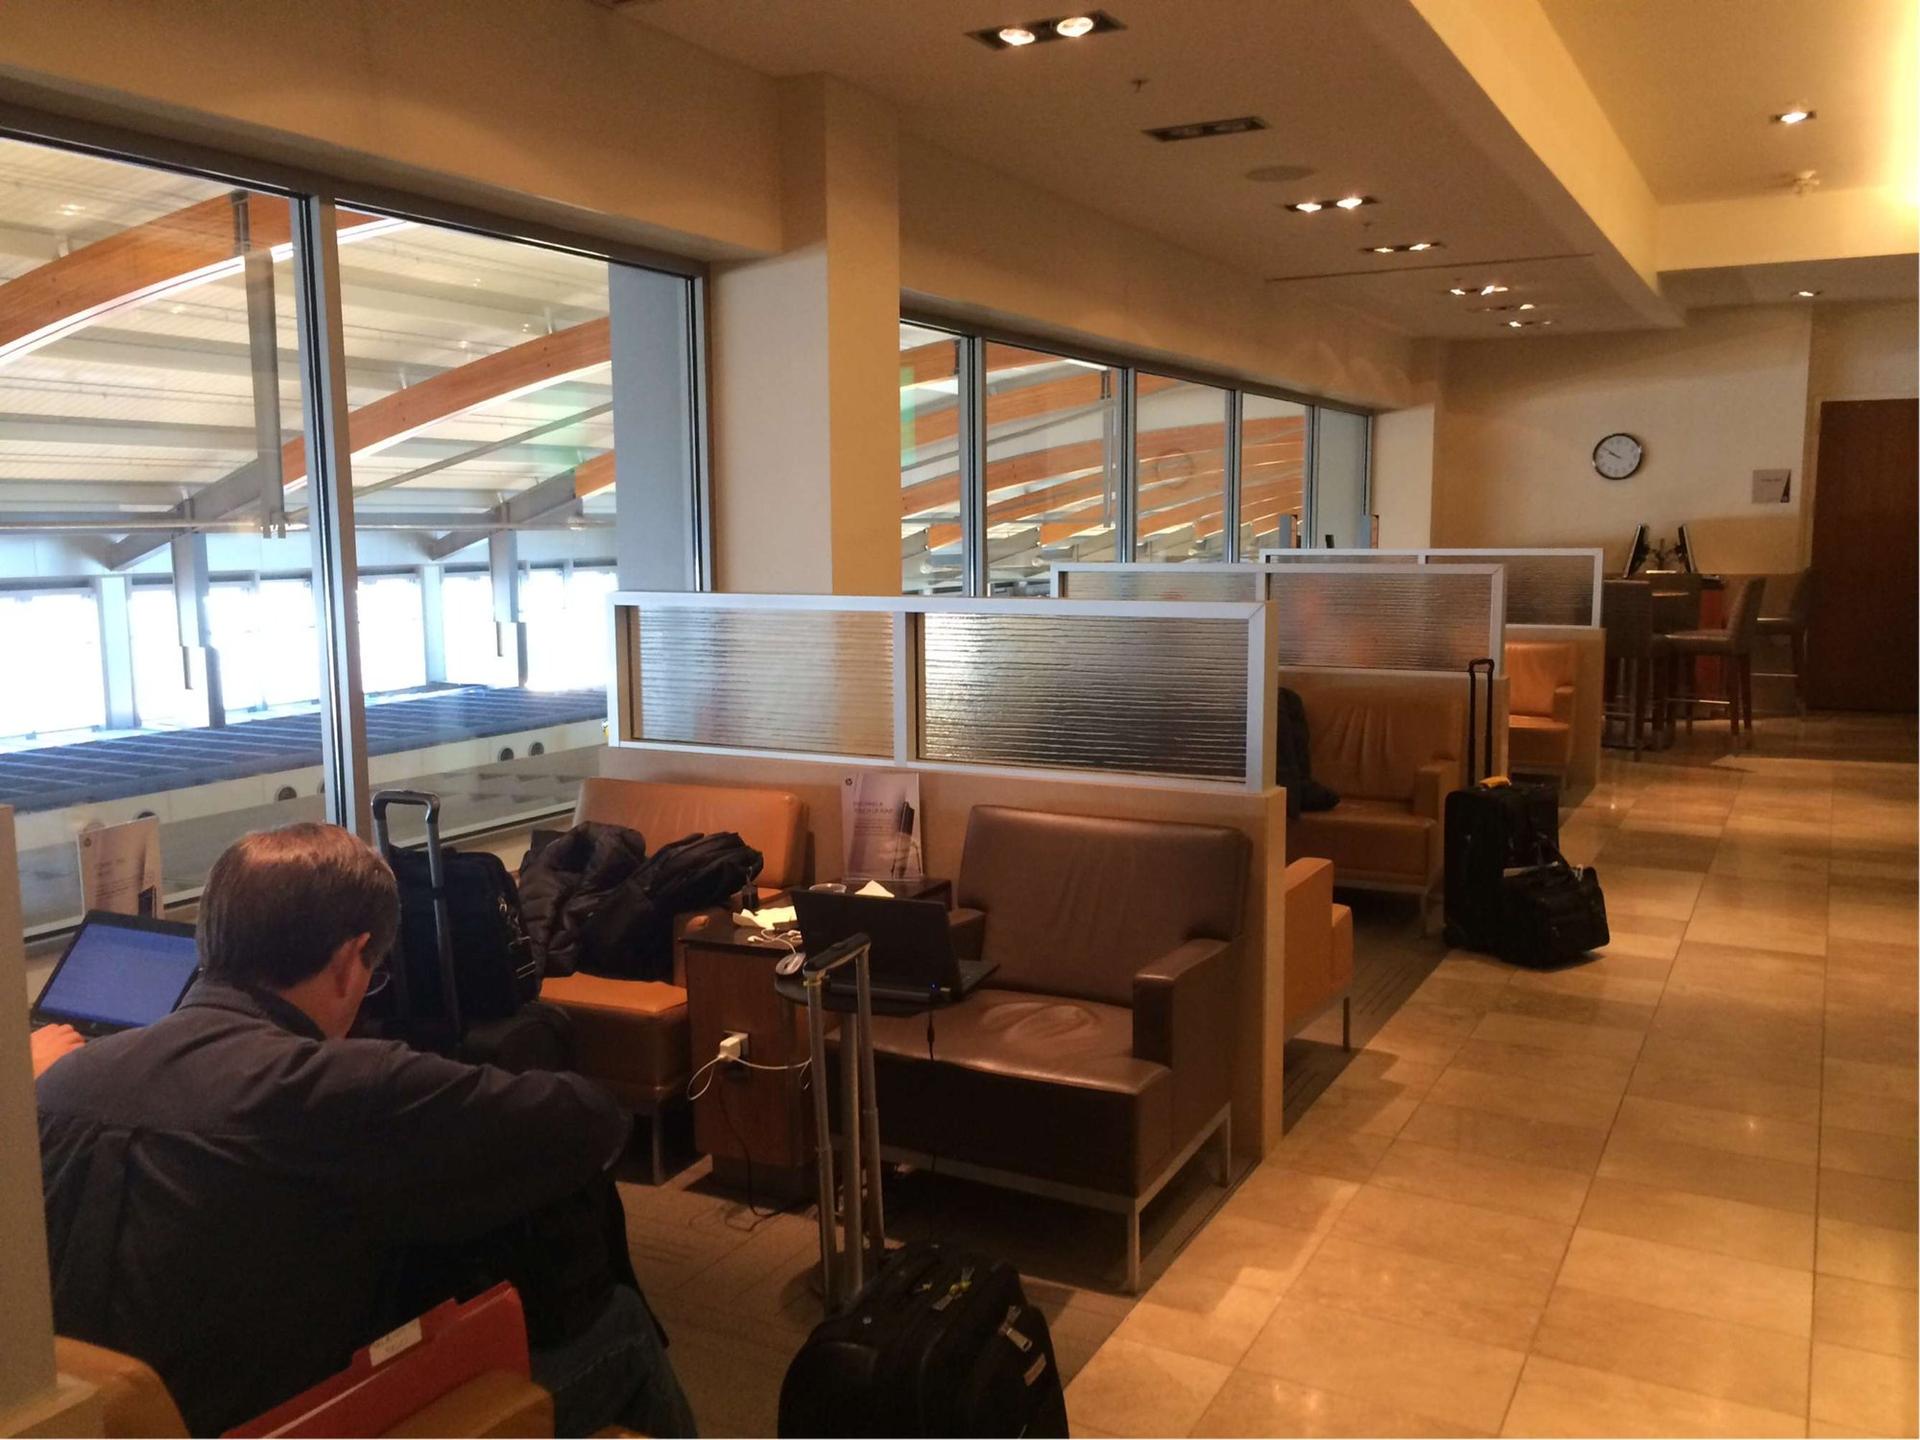 American Airlines Admirals Club image 10 of 31